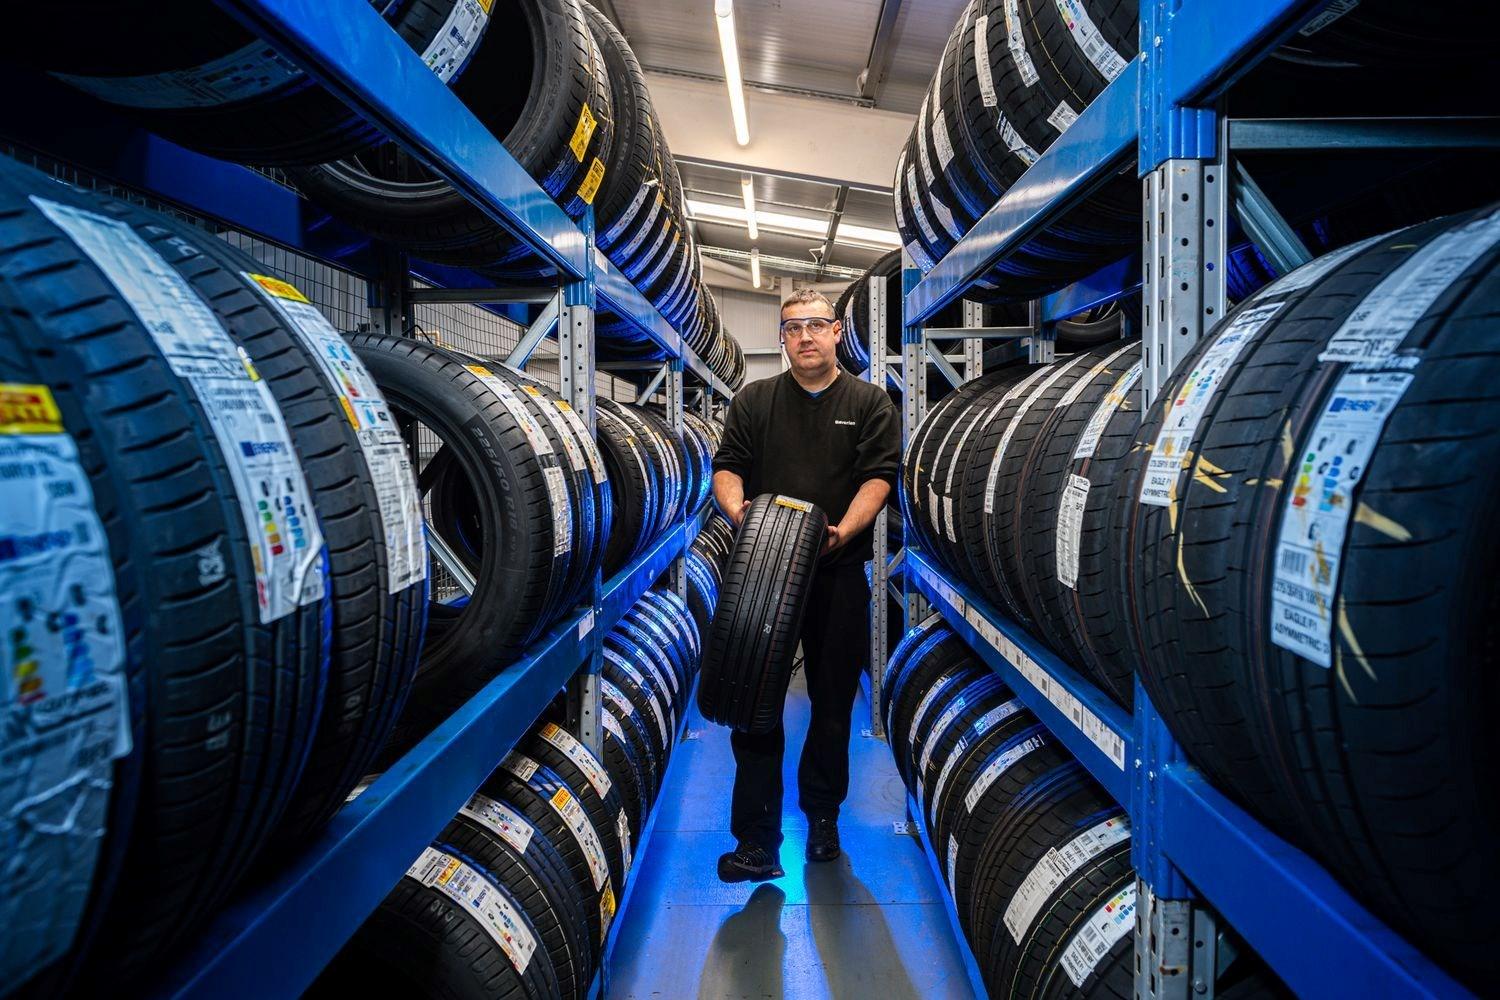 BMW Parts Specialist selects the new tyre for BMW vehicle that is undergoing a repair